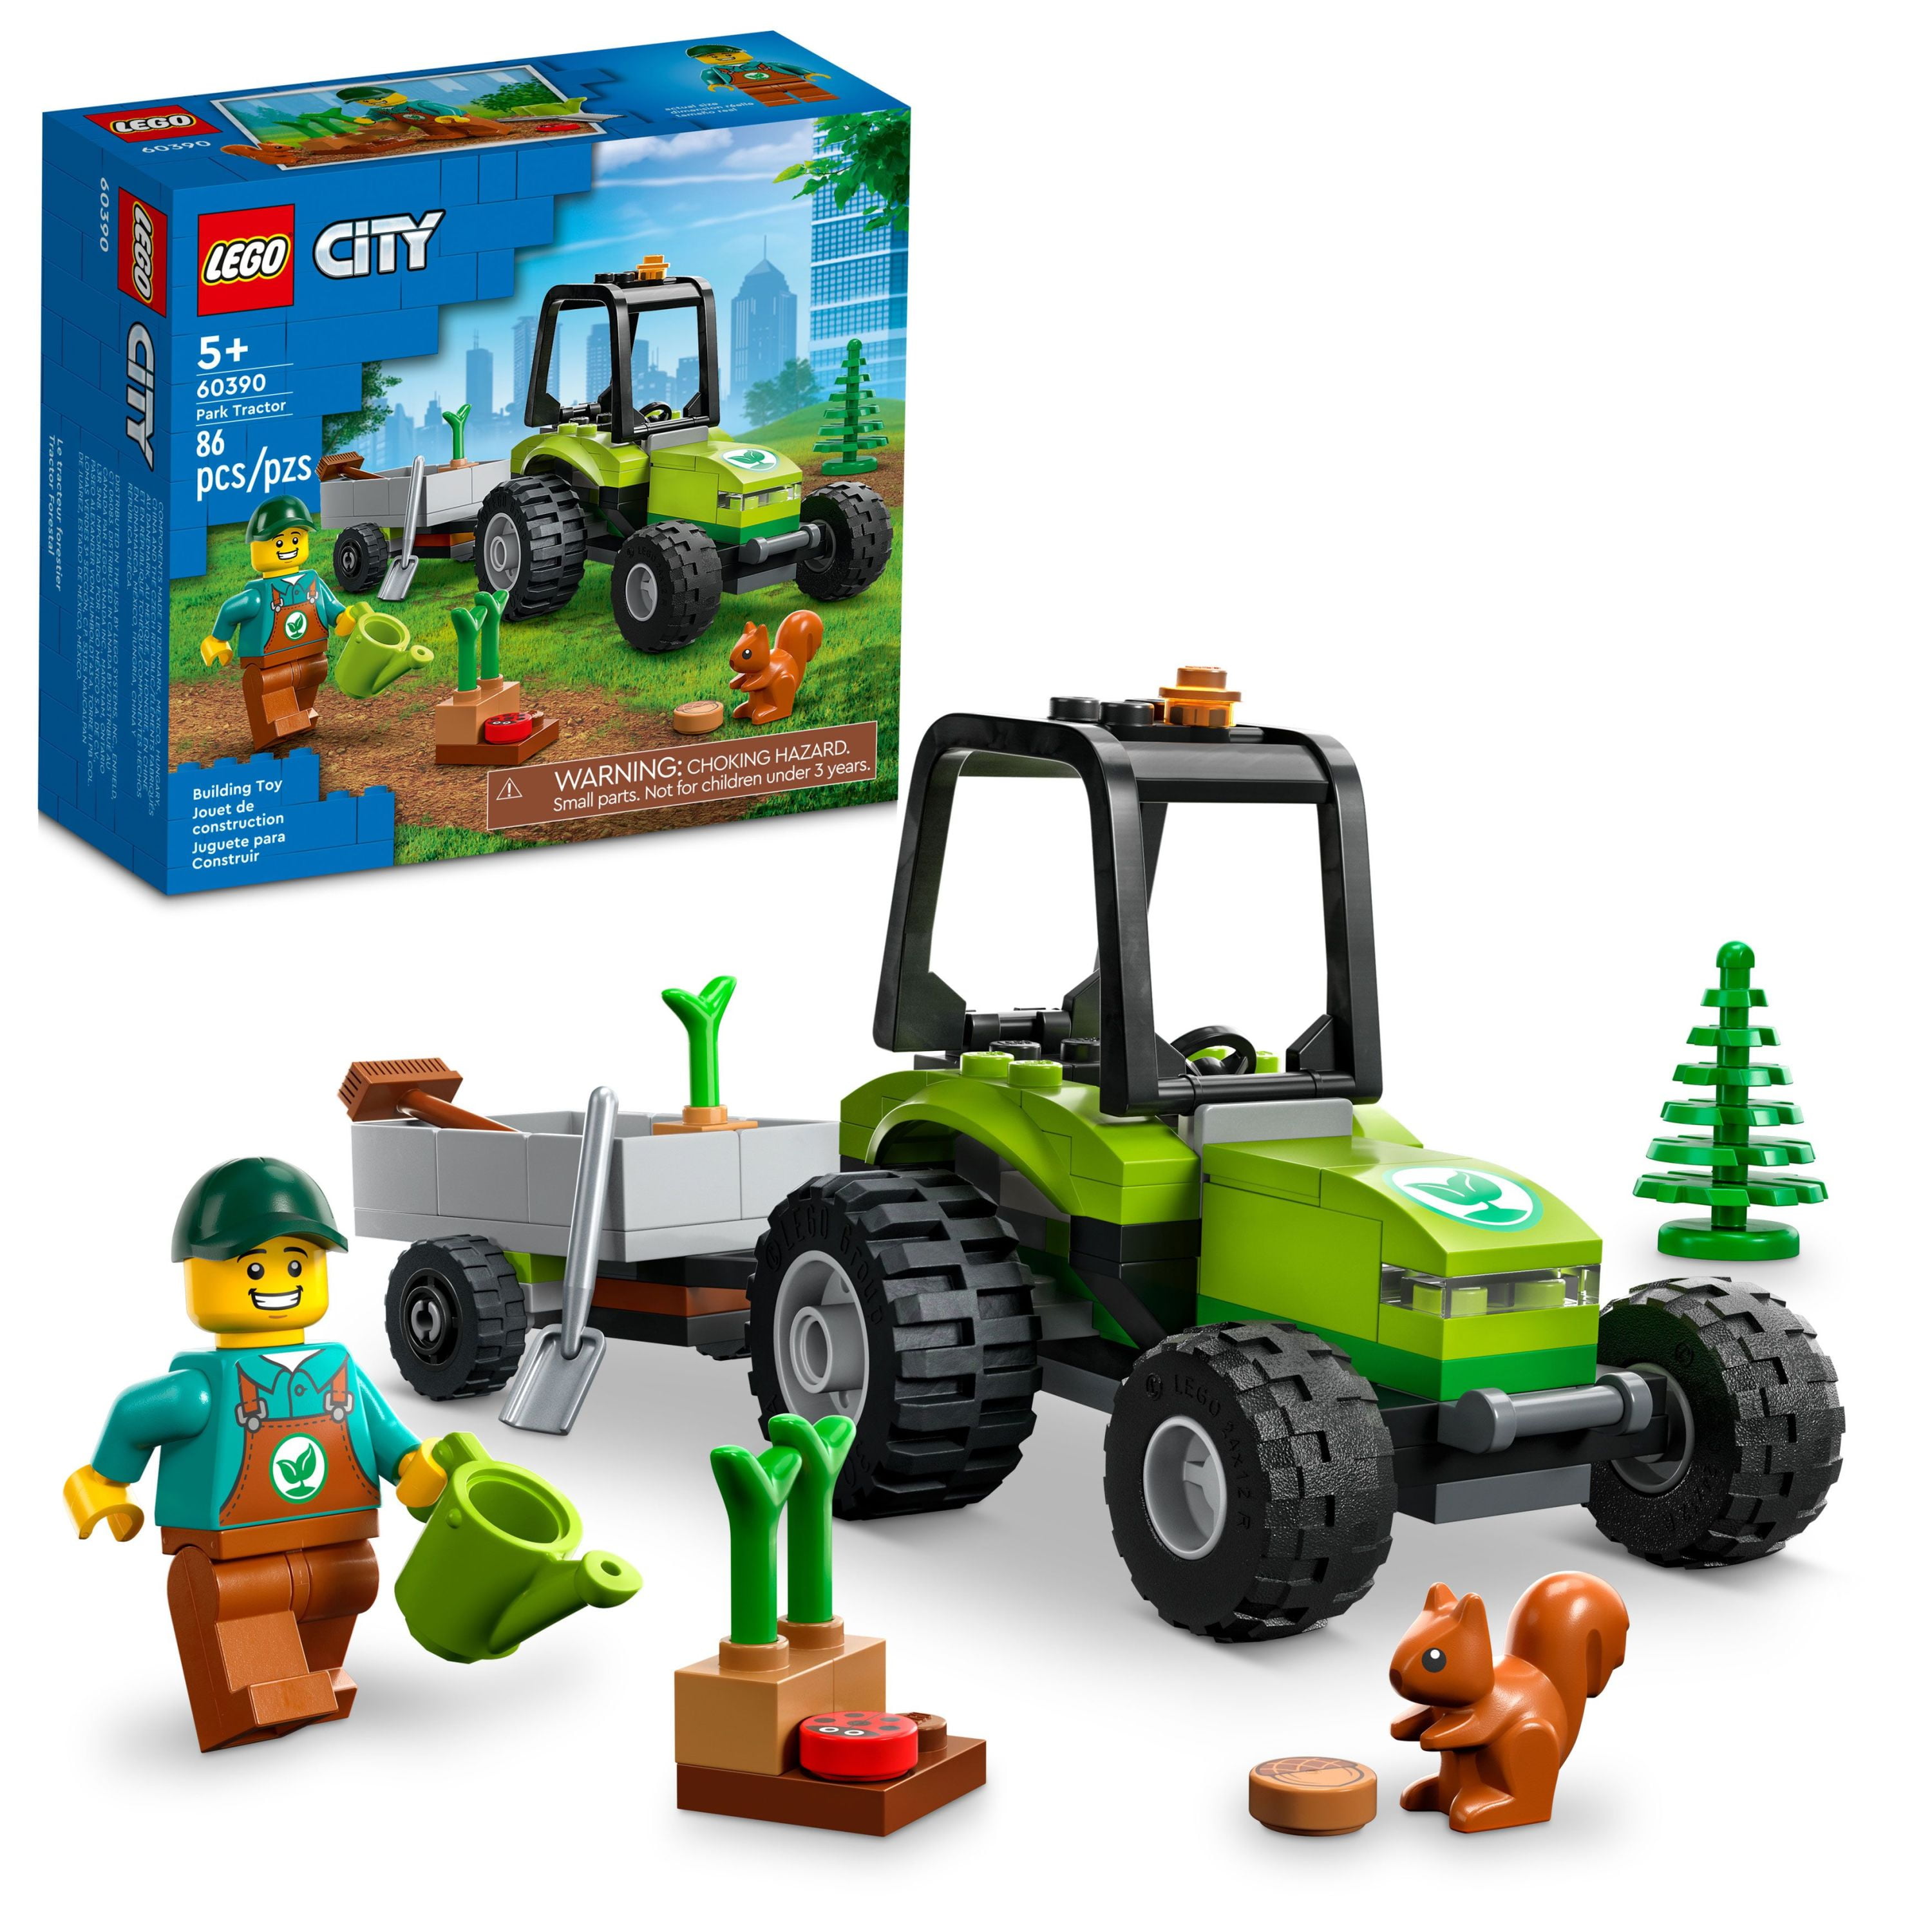 LEGO City Park Tractor and Trailer Toy Farm Vehicle 60390